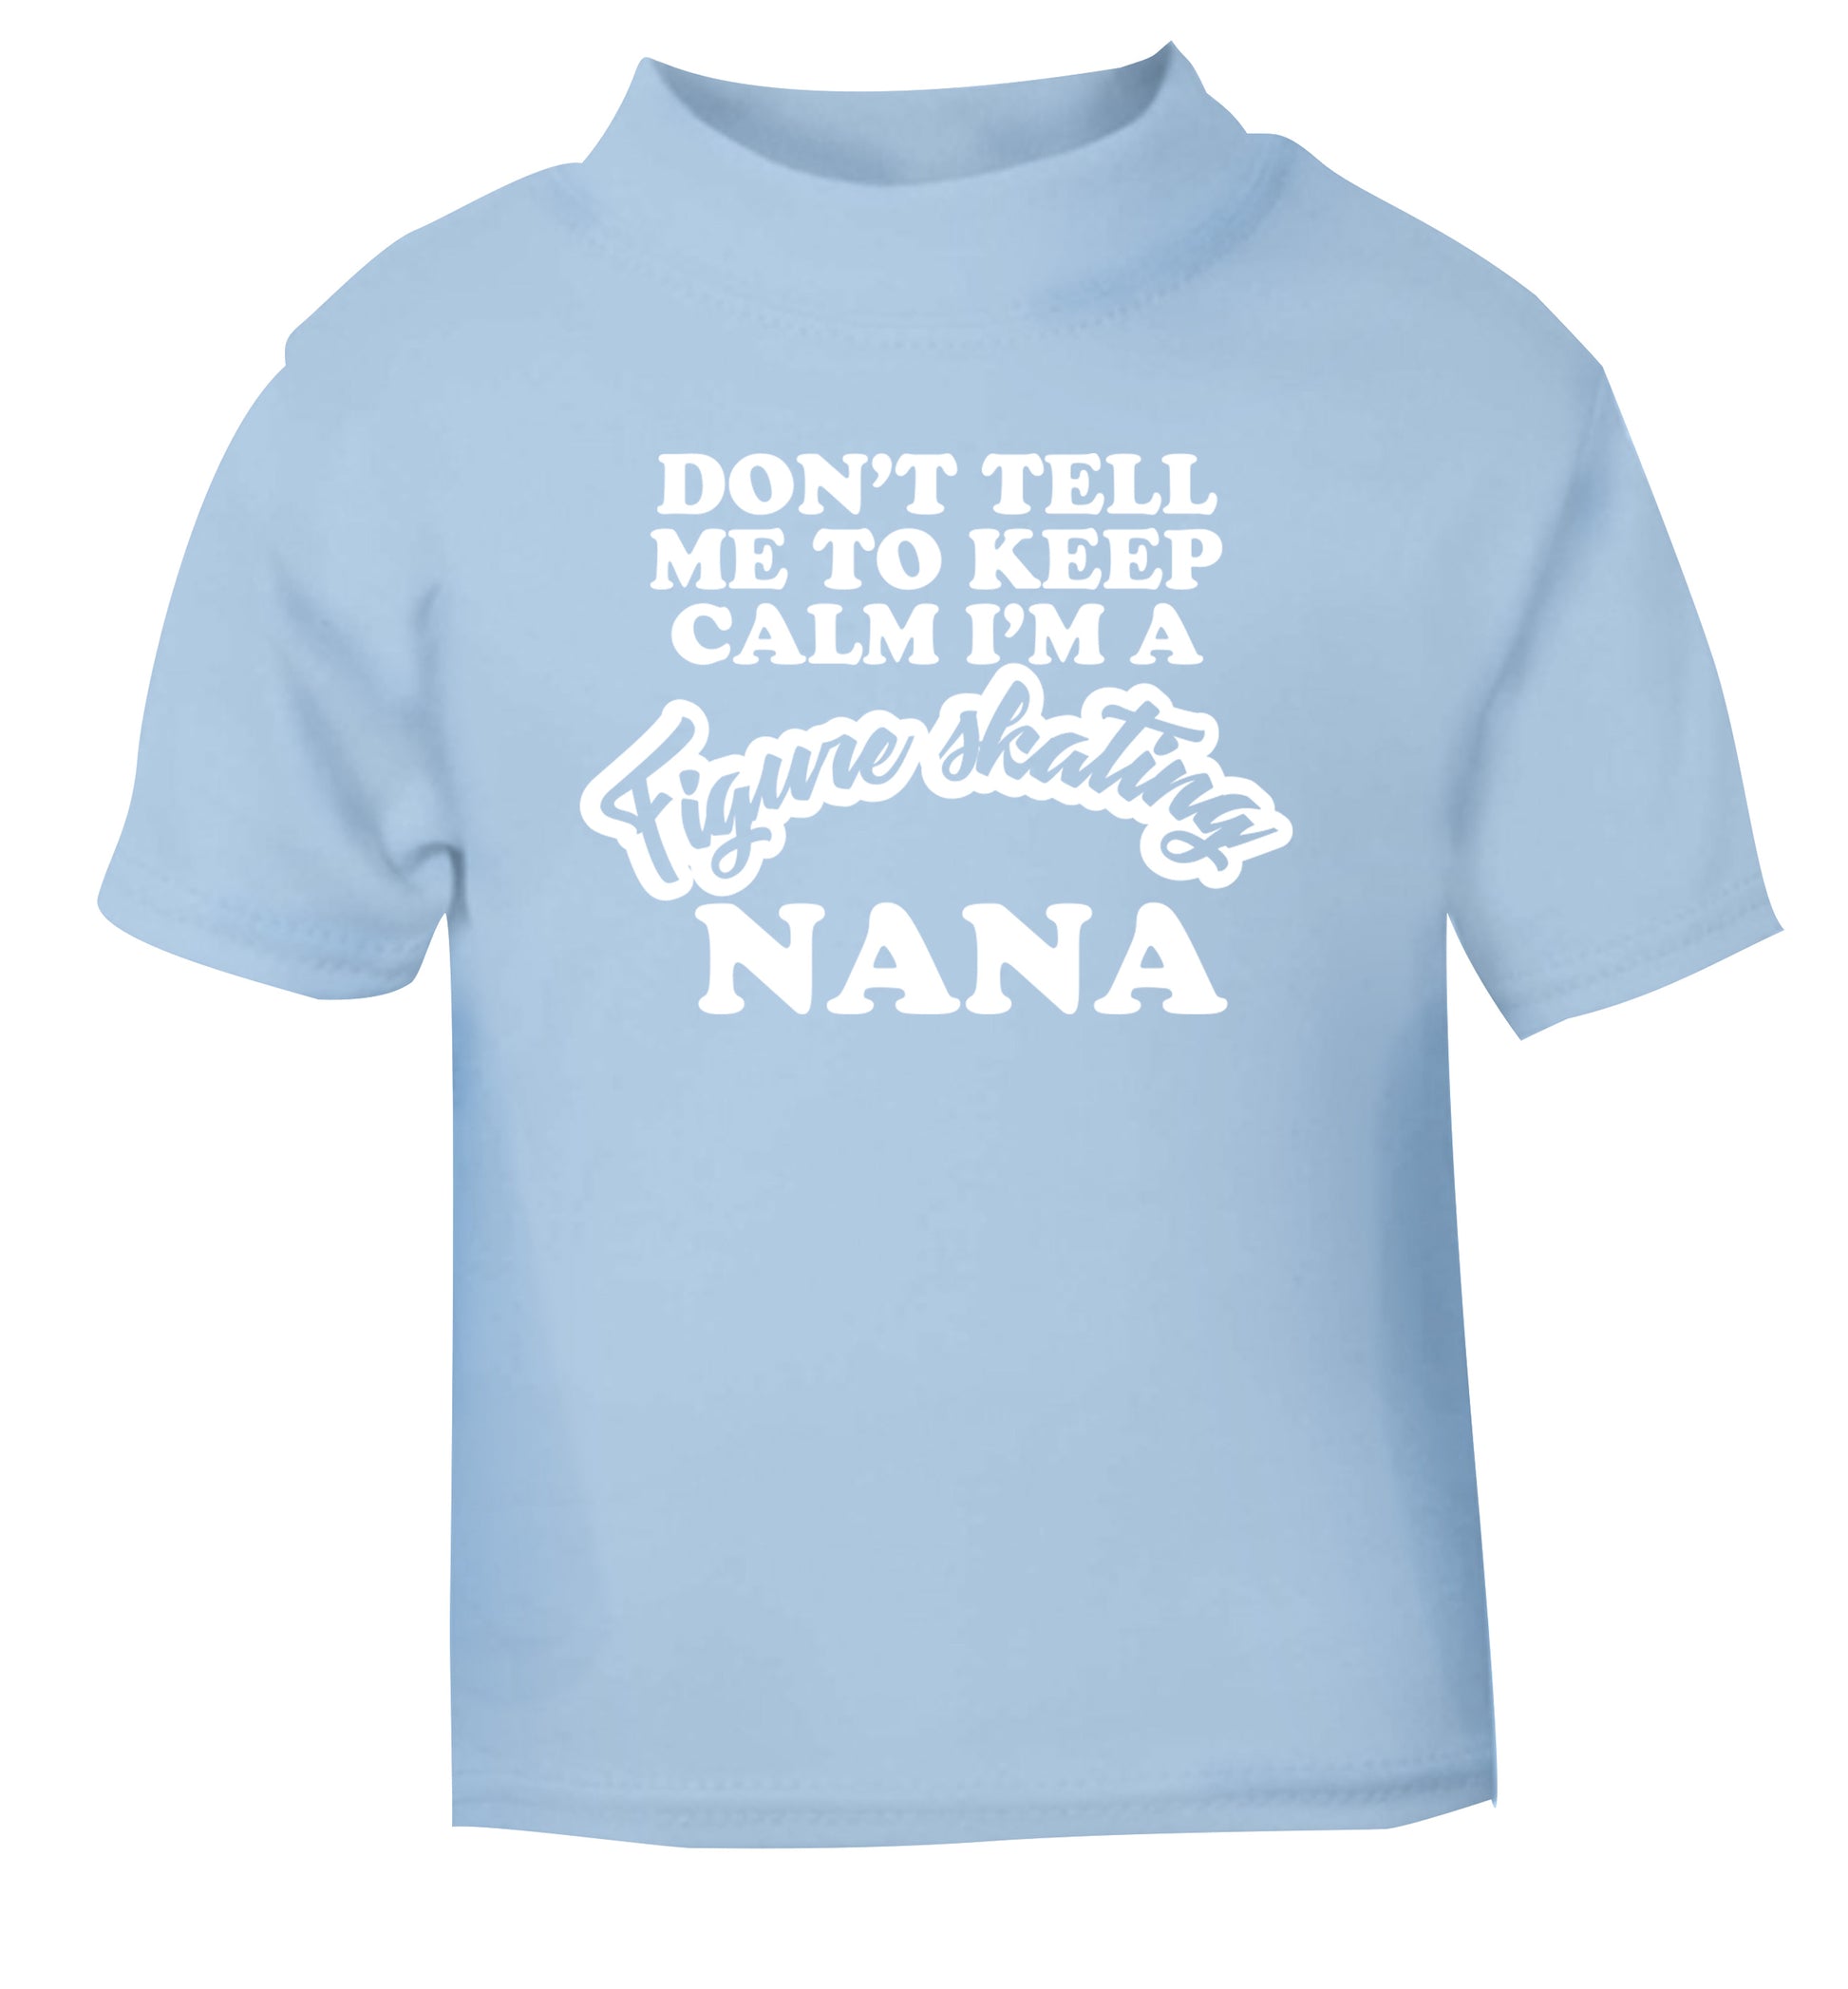 Don't tell me to keep calm I'm a figure skating nana light blue Baby Toddler Tshirt 2 Years